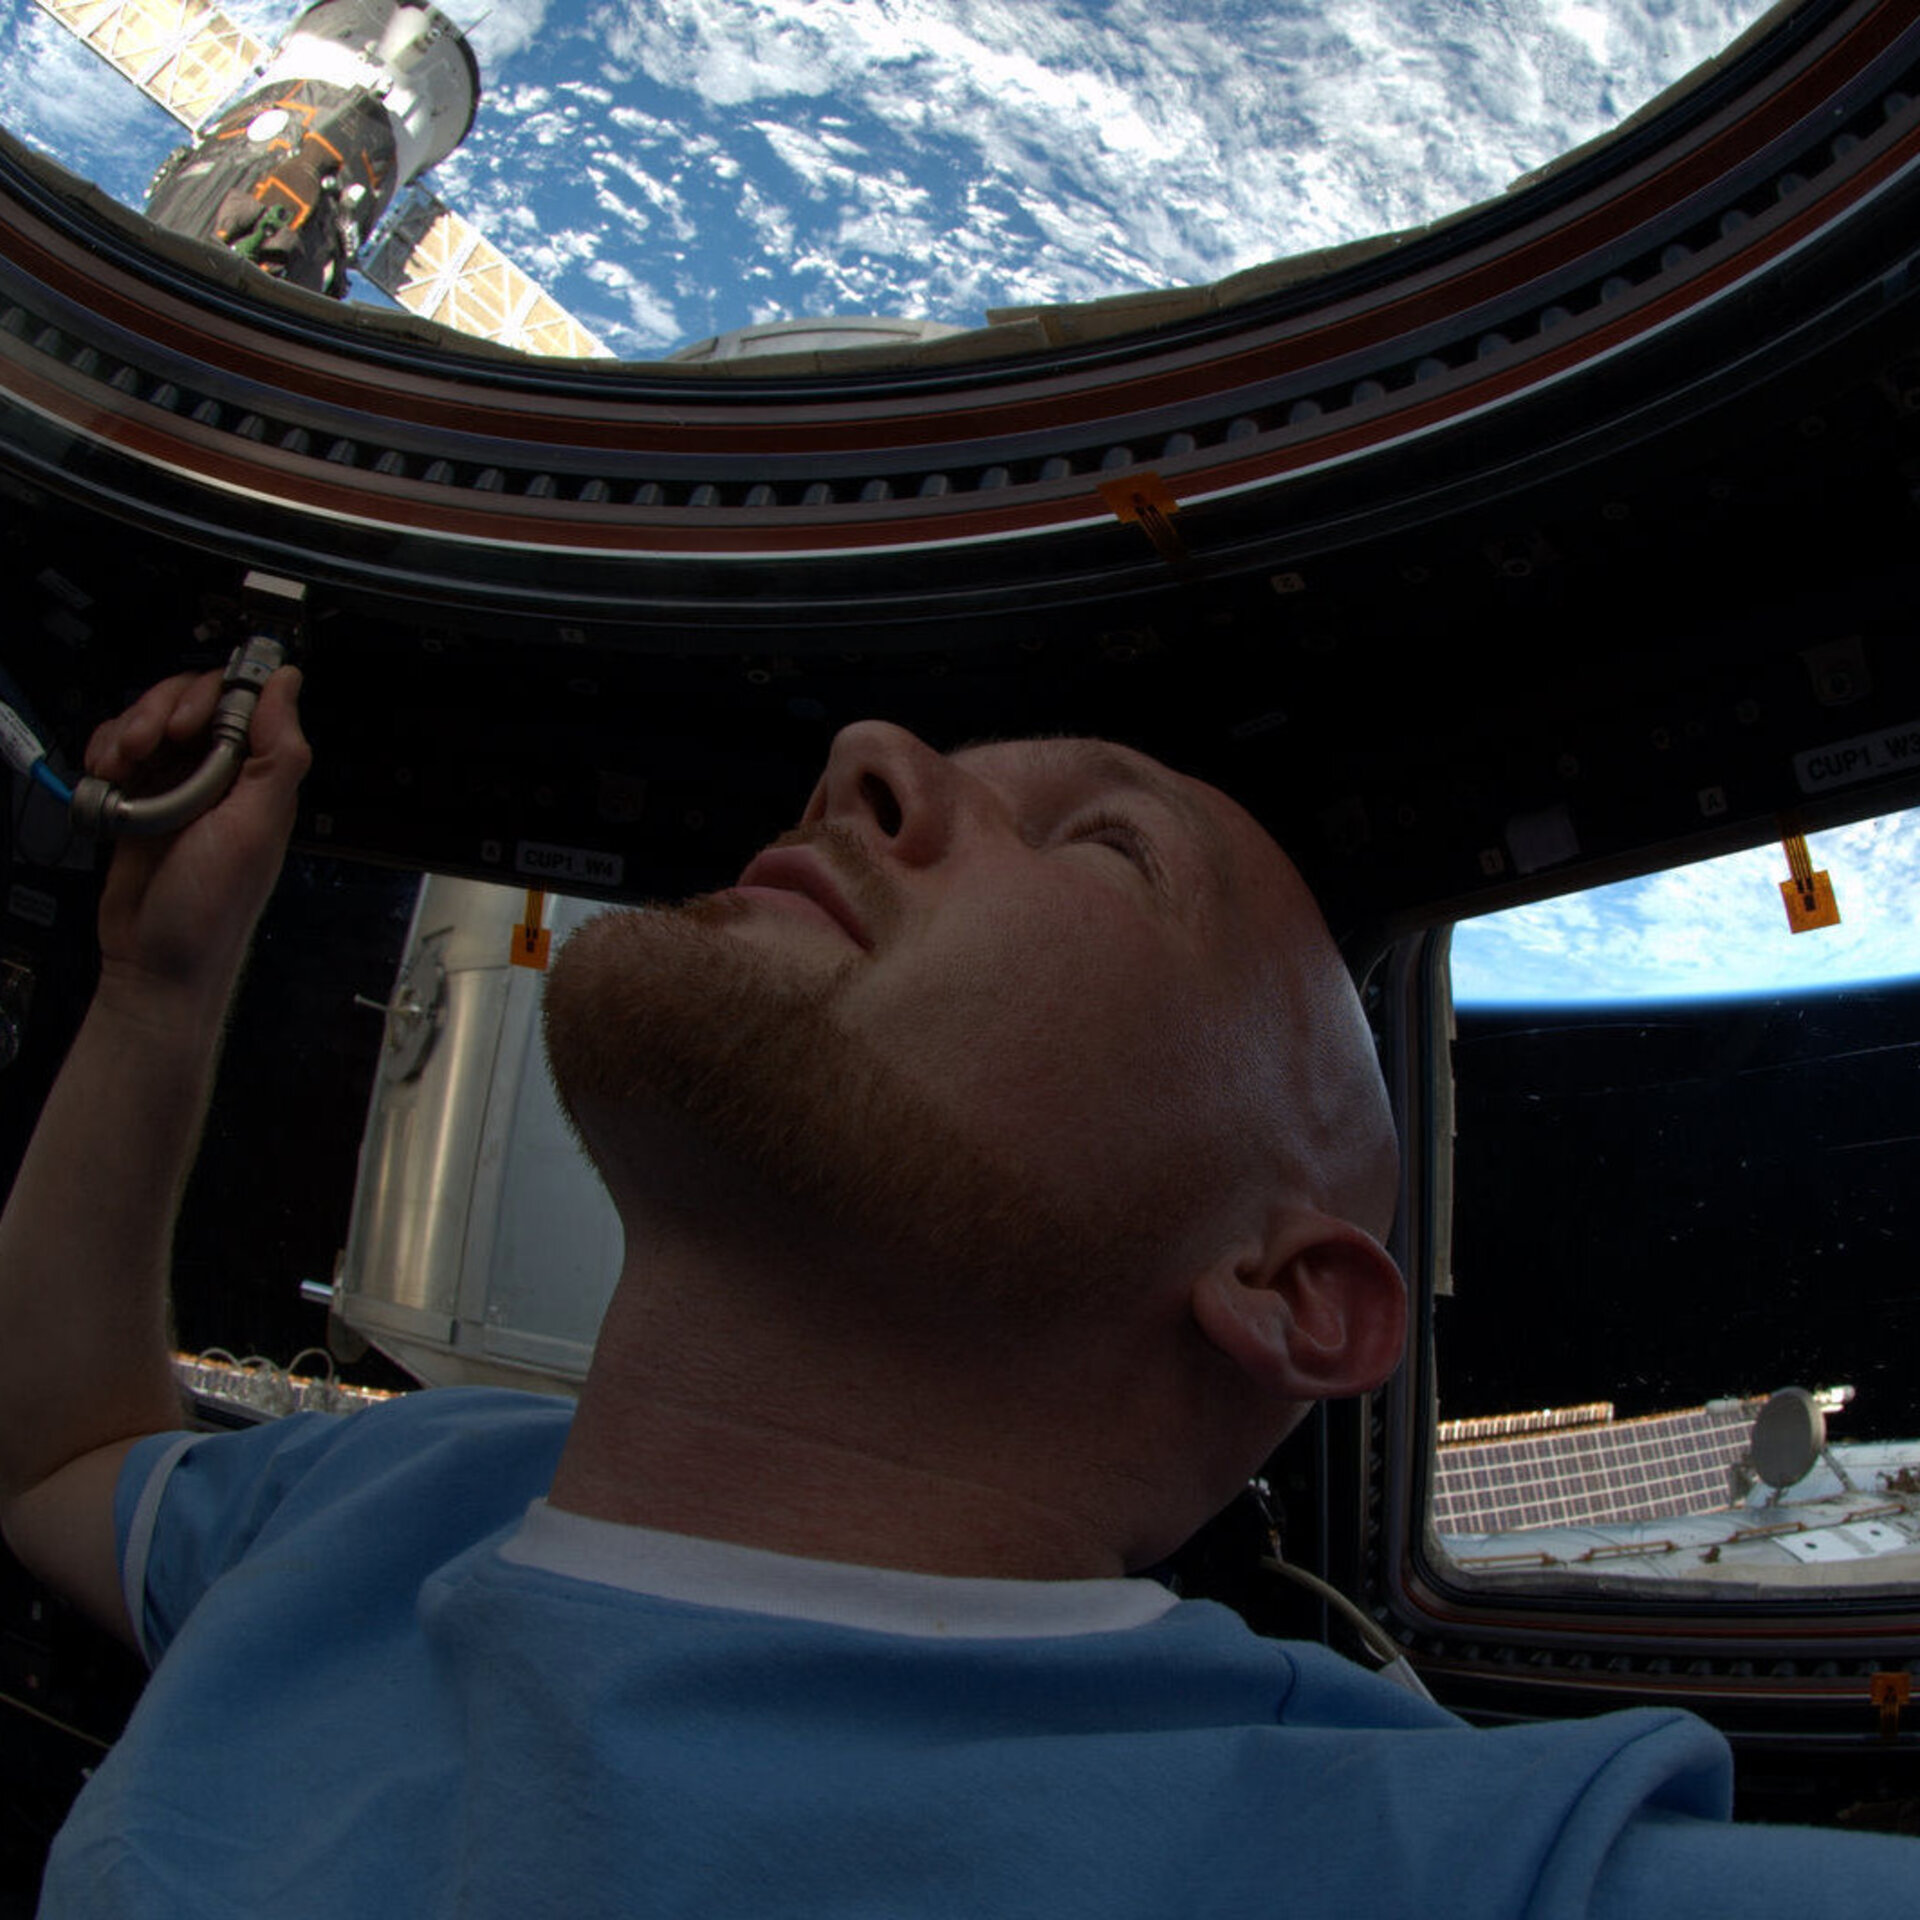 Alexander Gerst in the cupola